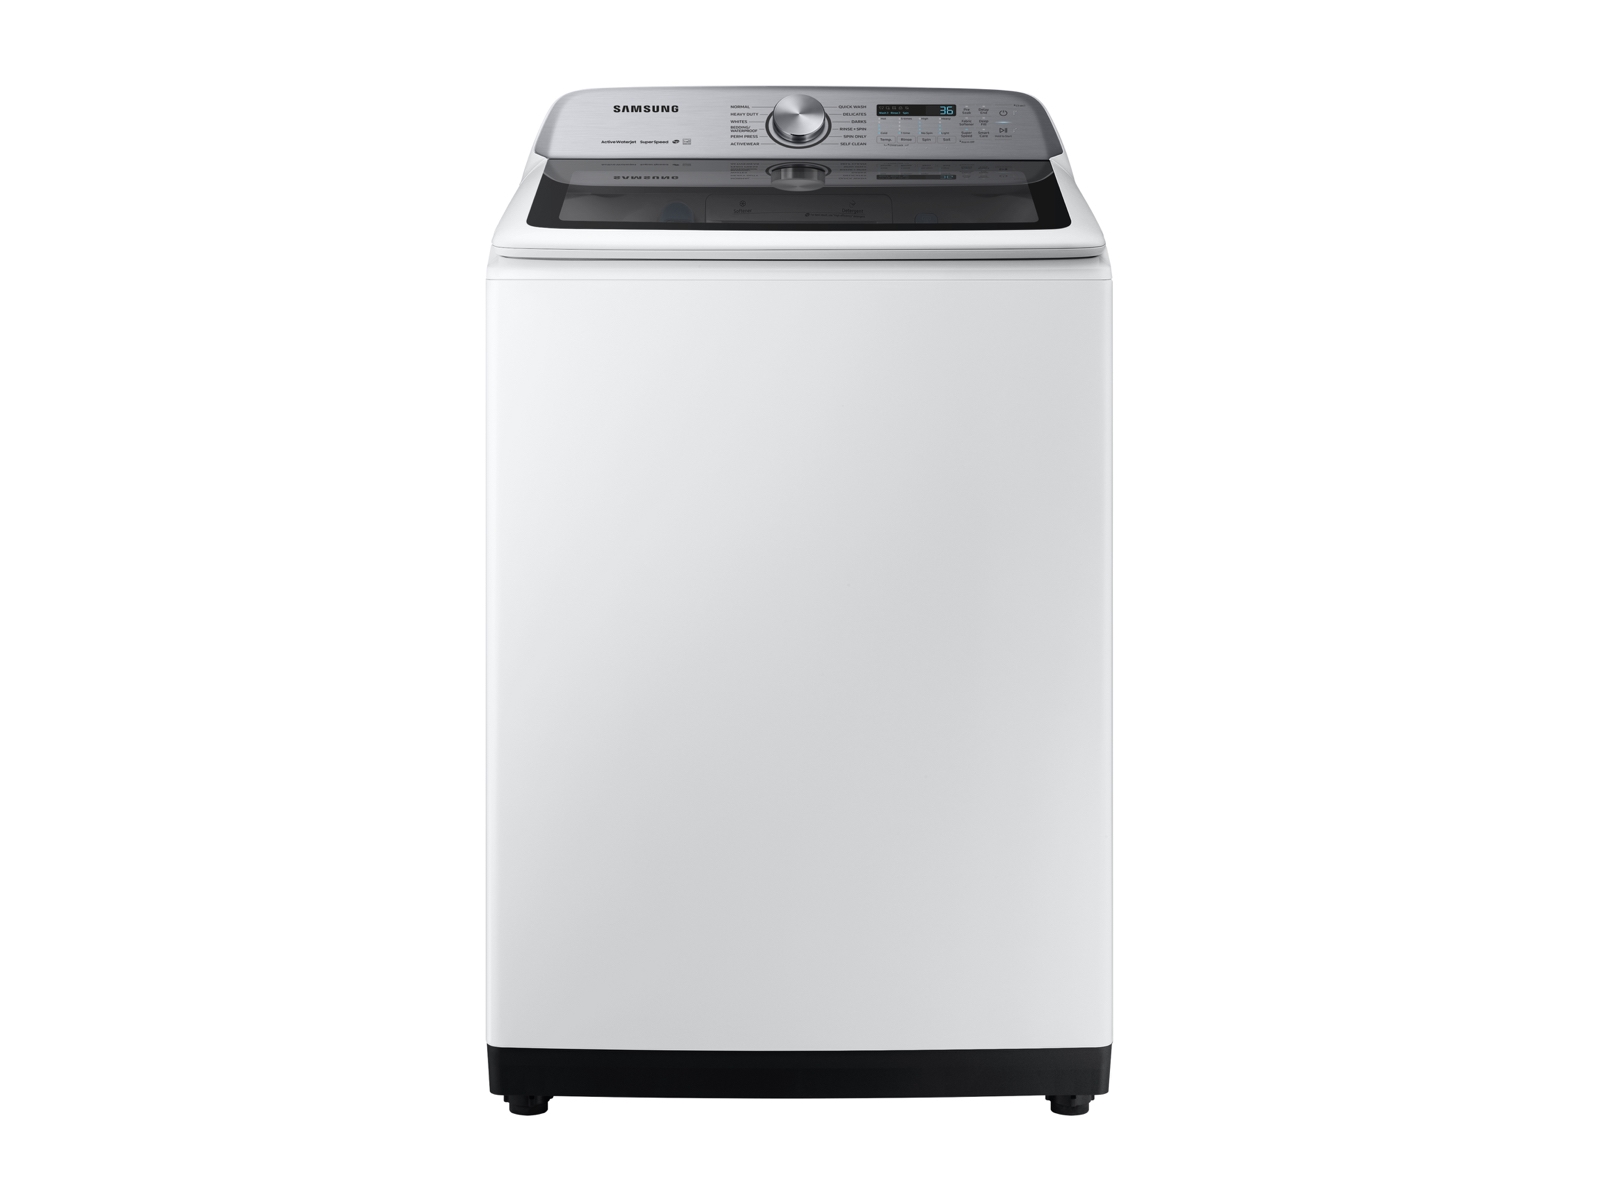 Photos - Washing Machine Samsung 5.0 cu. ft. Top Load Washer with Super Speed in White(WA50R5400AW/ 